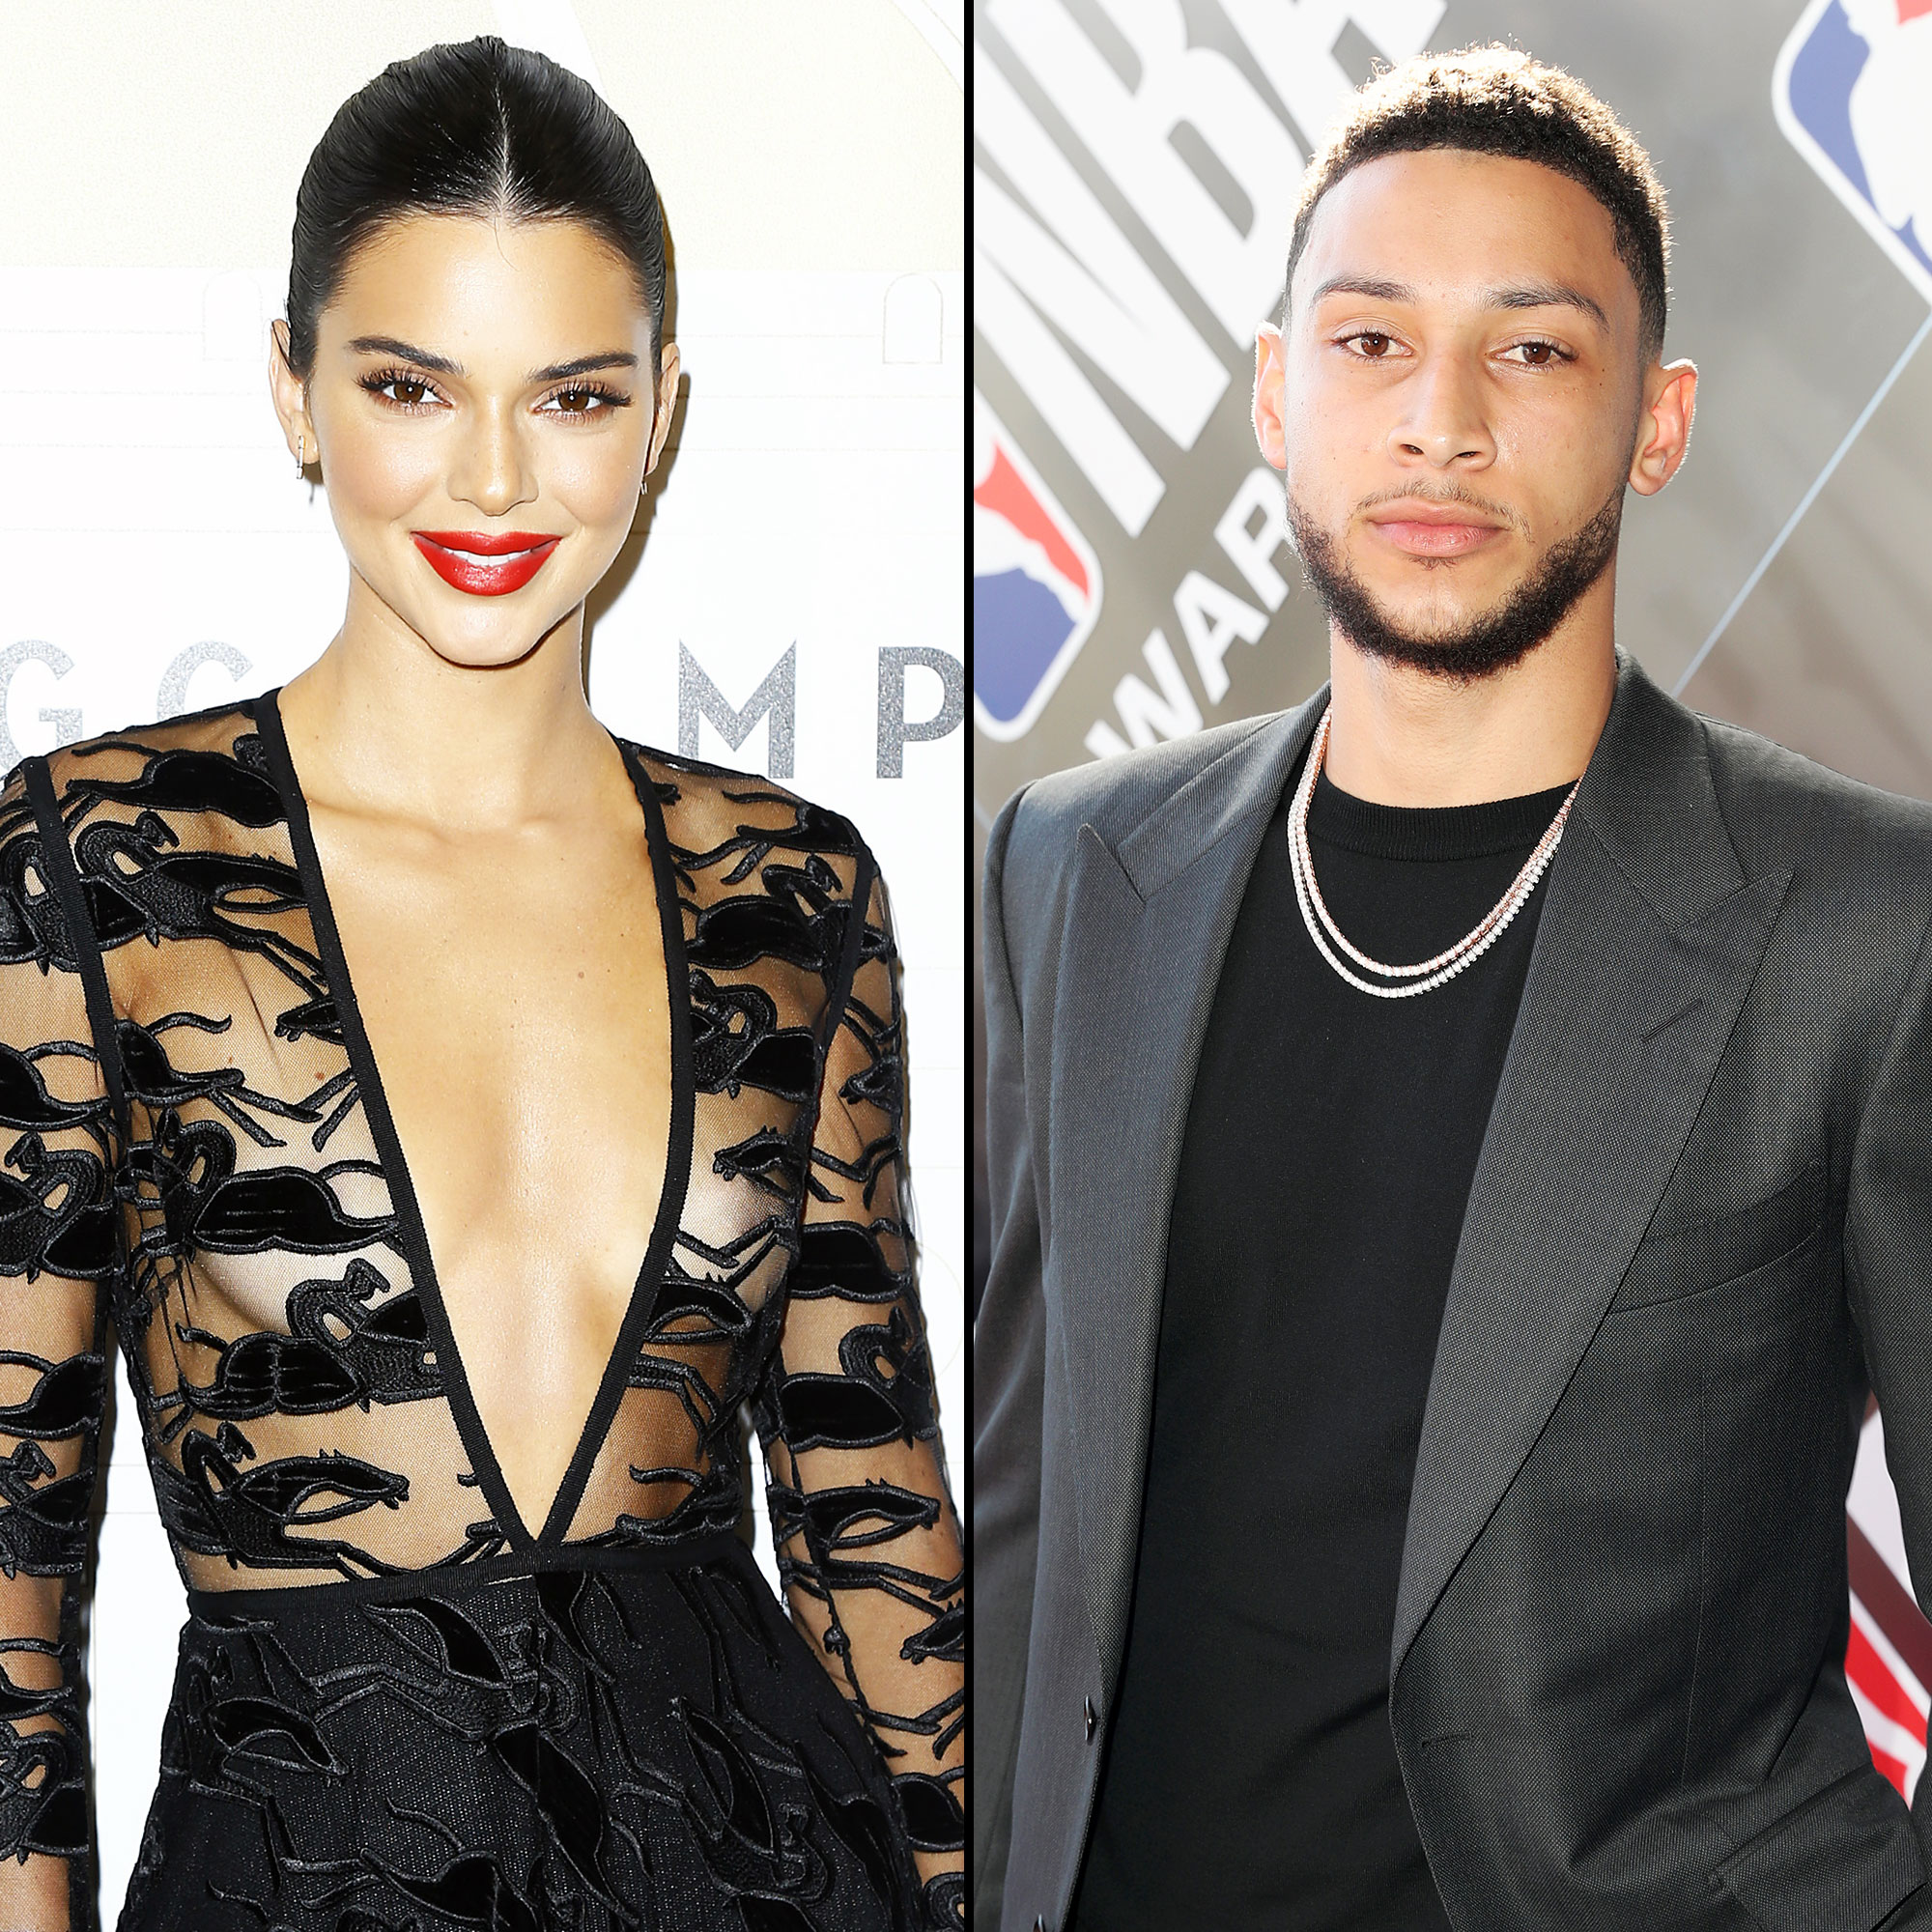 5 celebrities confirmed to have dated Ben Simmons including